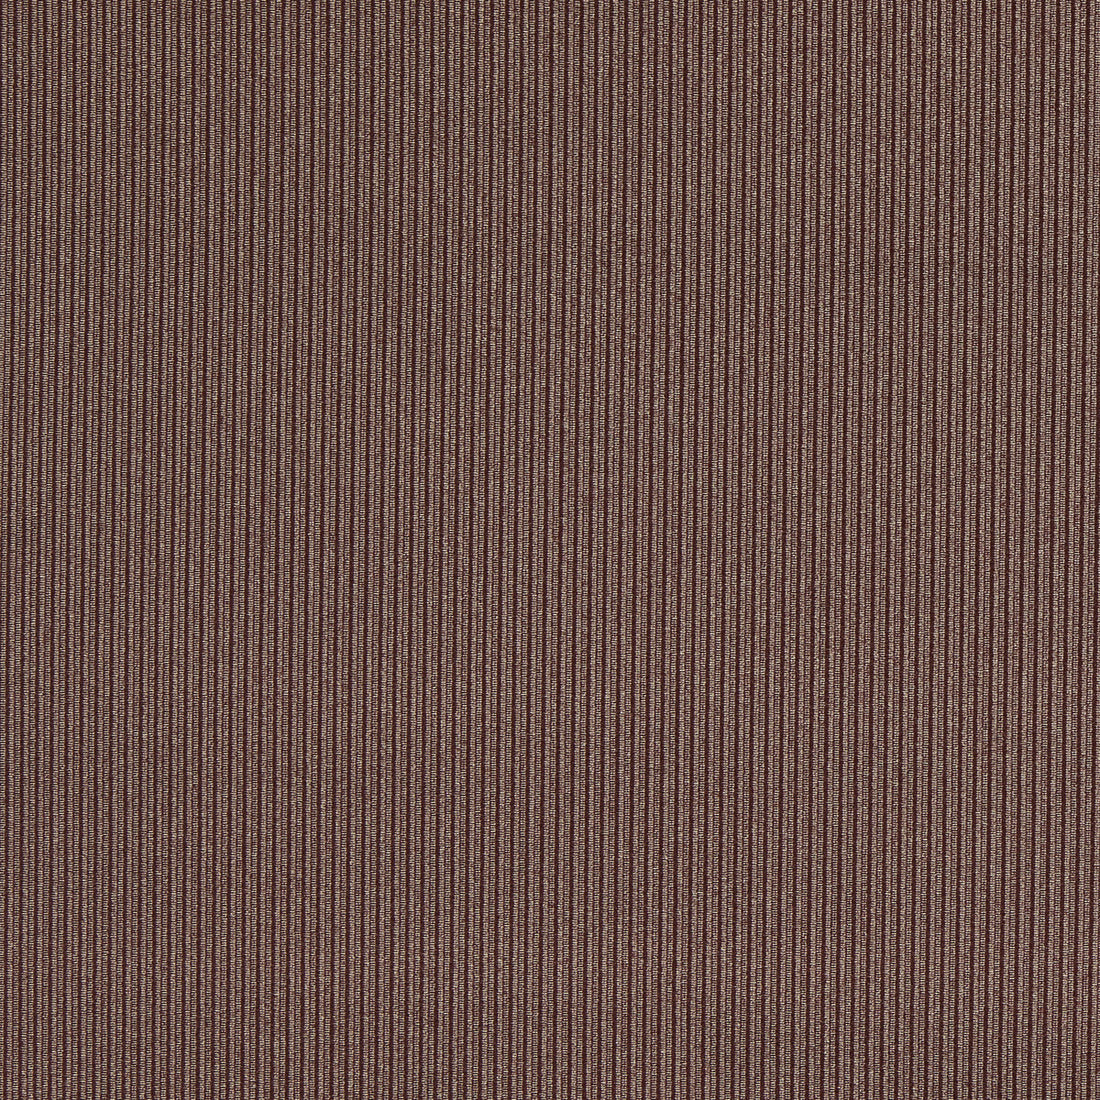 Ashdown fabric in mulberry color - pattern F1688/06.CAC.0 - by Clarke And Clarke in the Whitworth collection